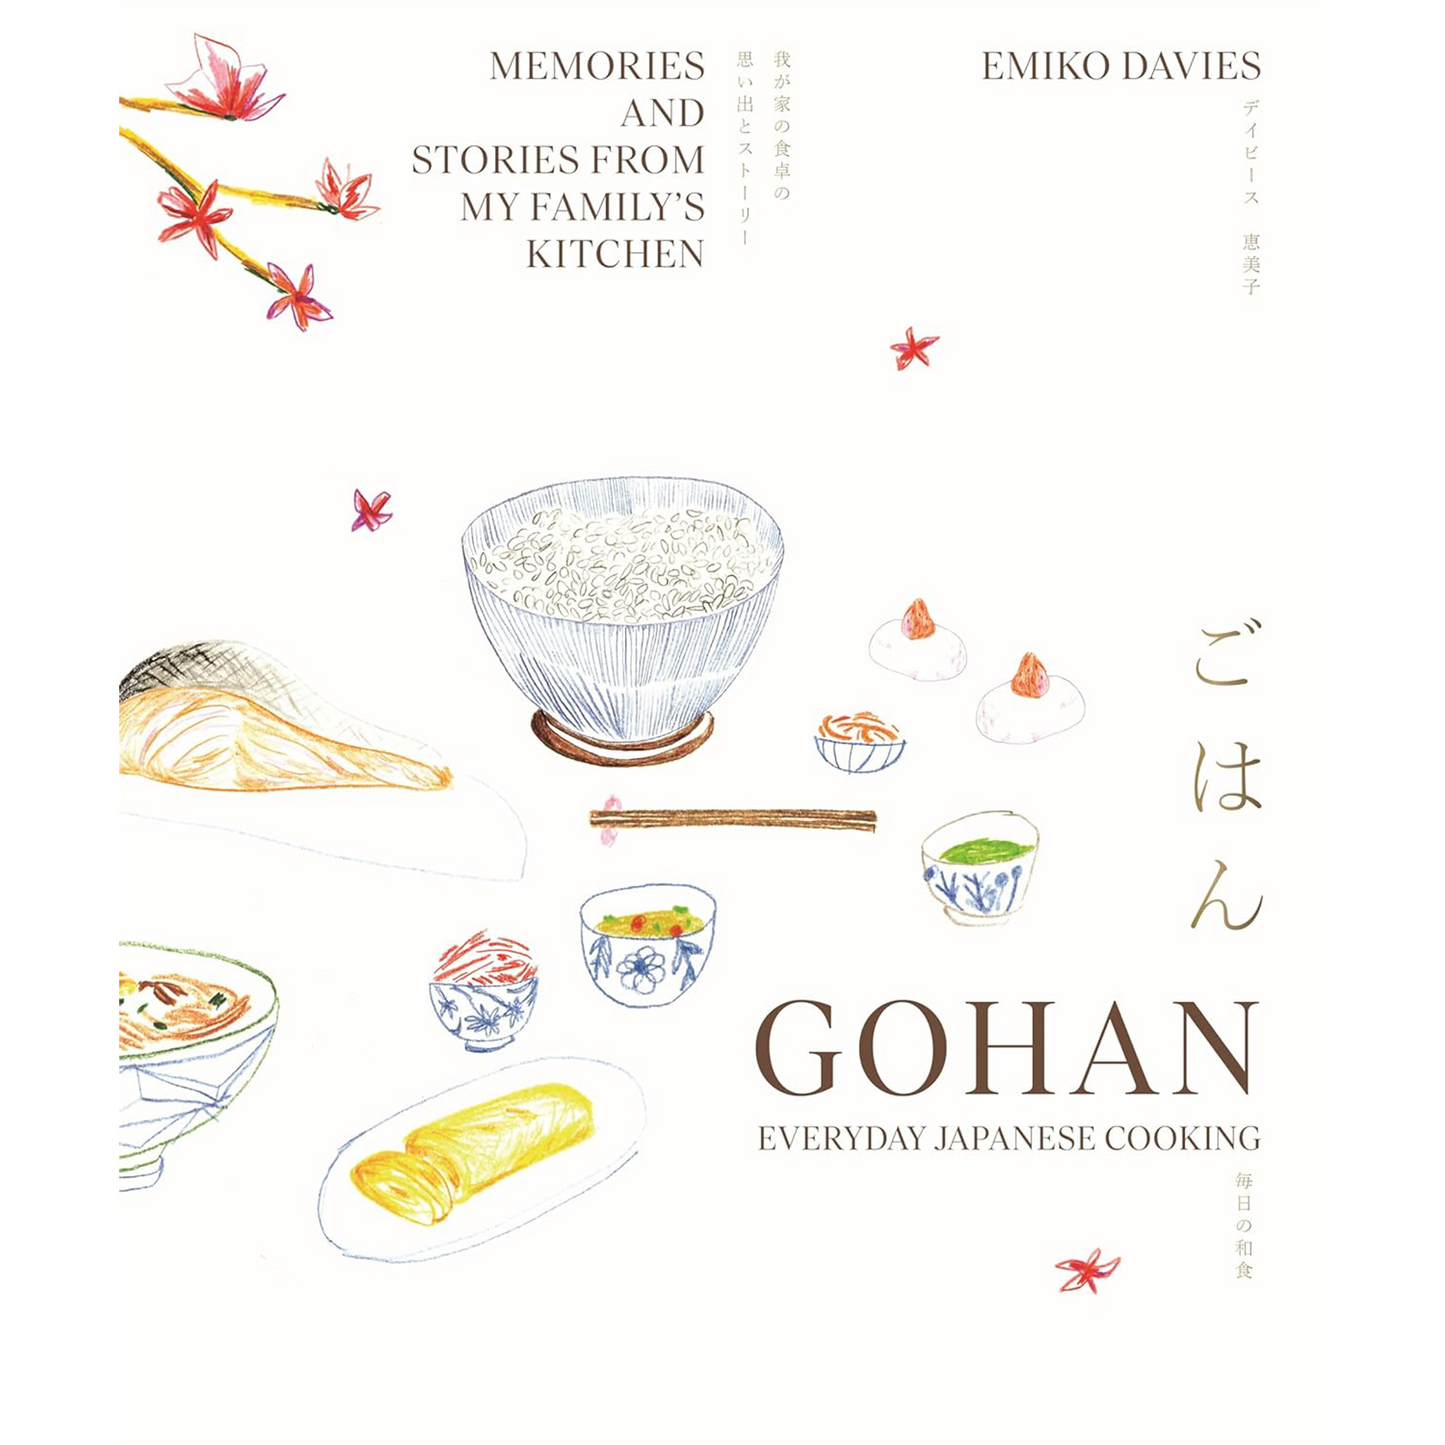 Gohan Everyday Japanese Cooking Memories and Stories from My Family's Kitchen